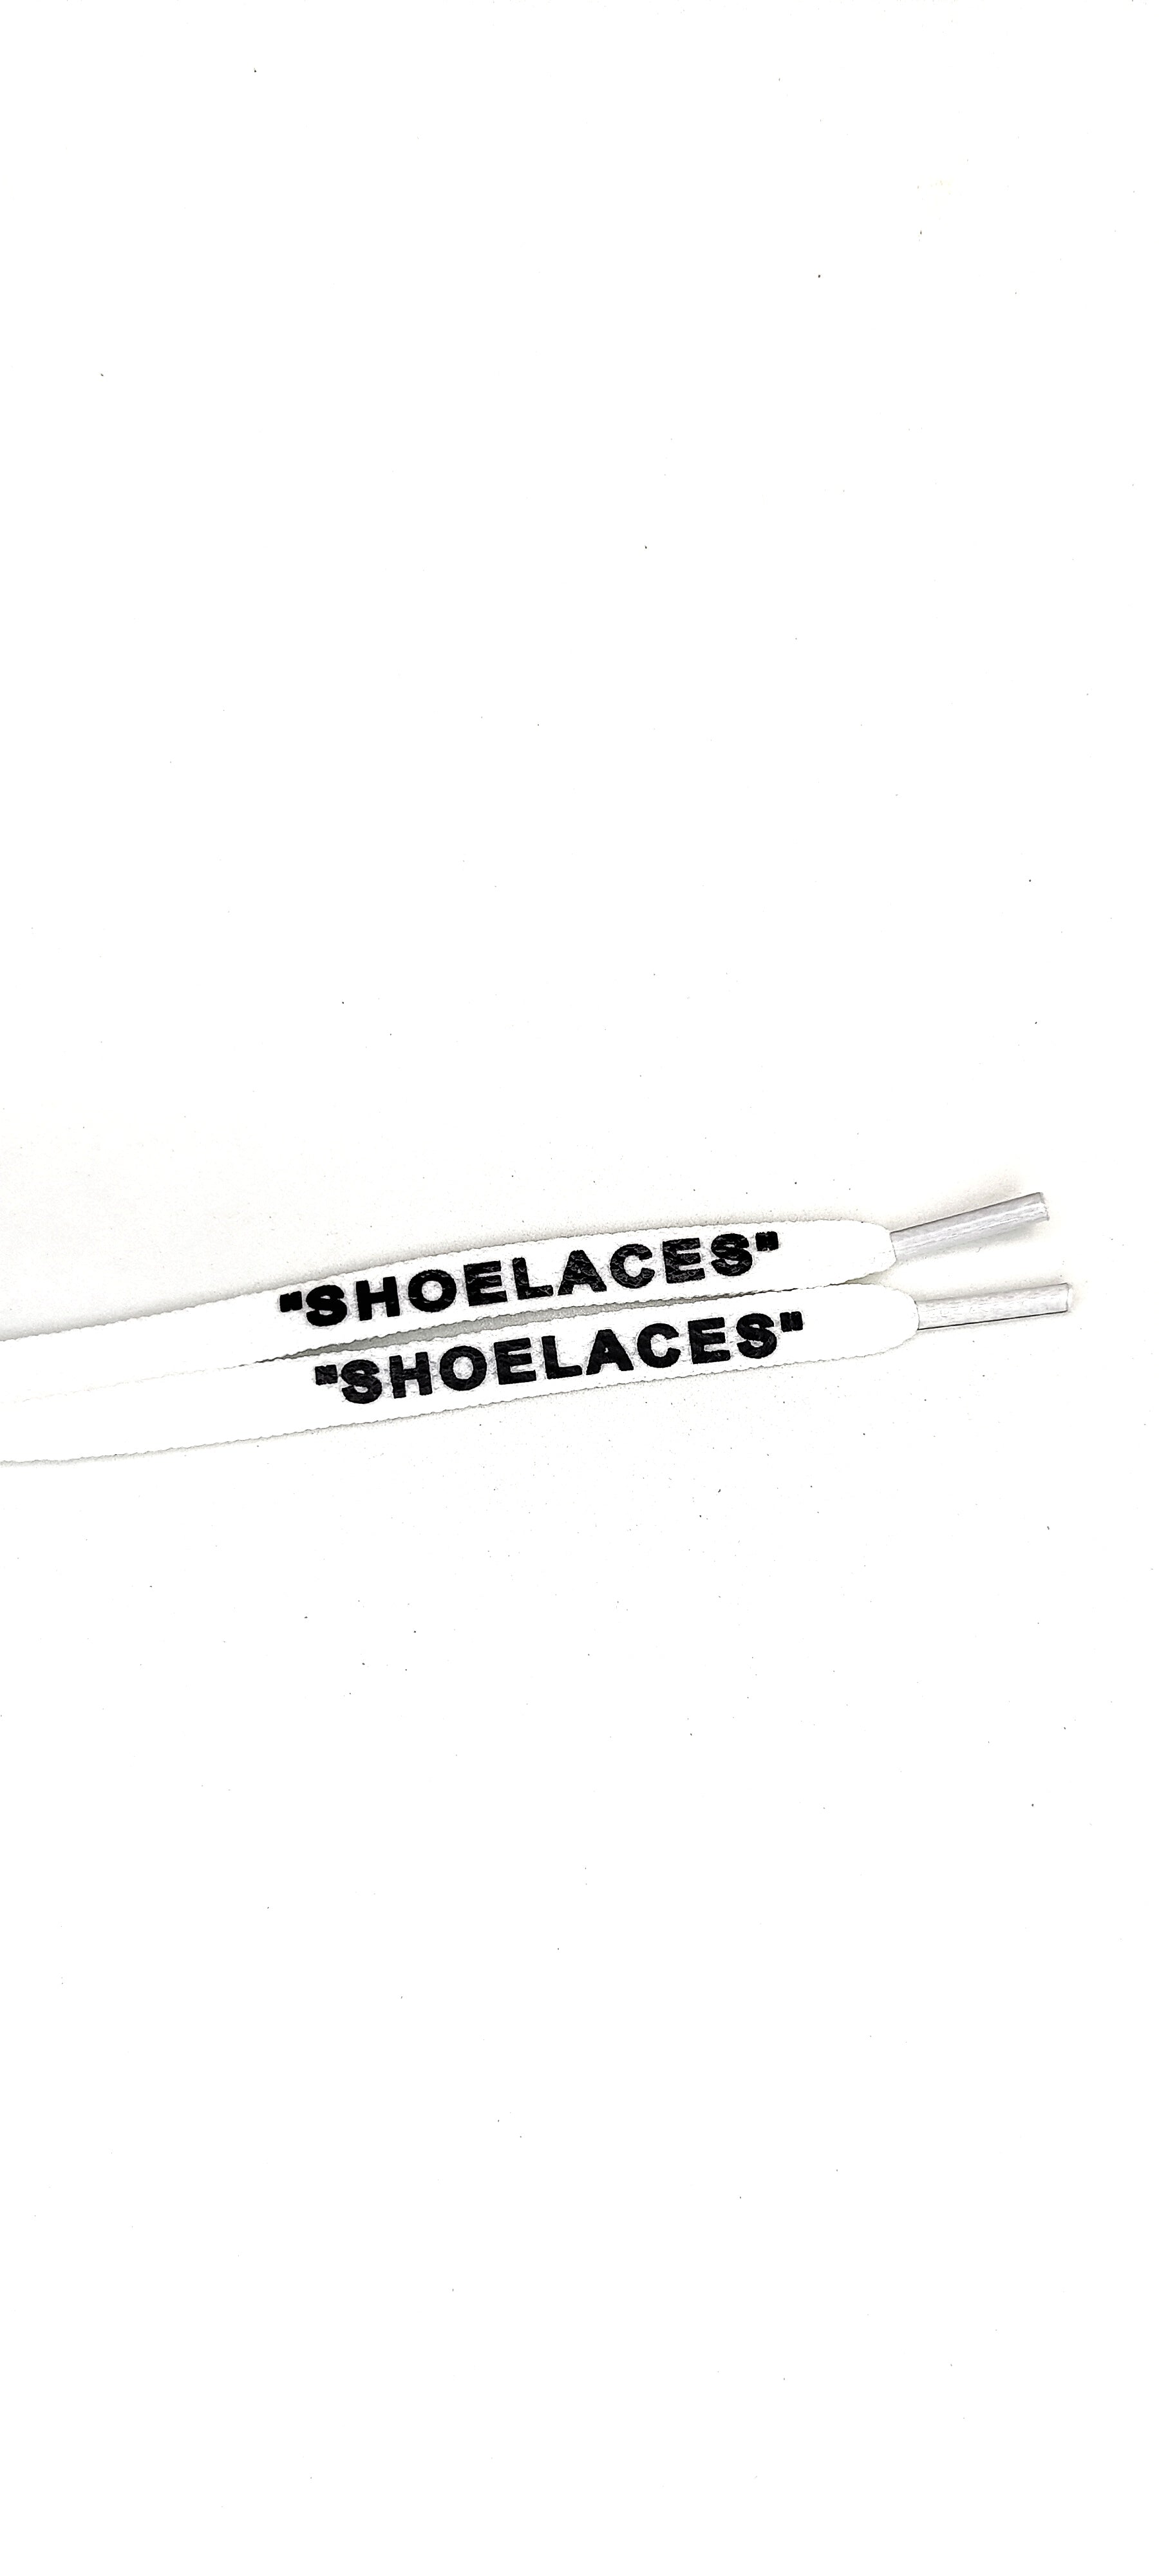 WHITE OFF-WHITE STYLE "SHOELACES" BY TGLC